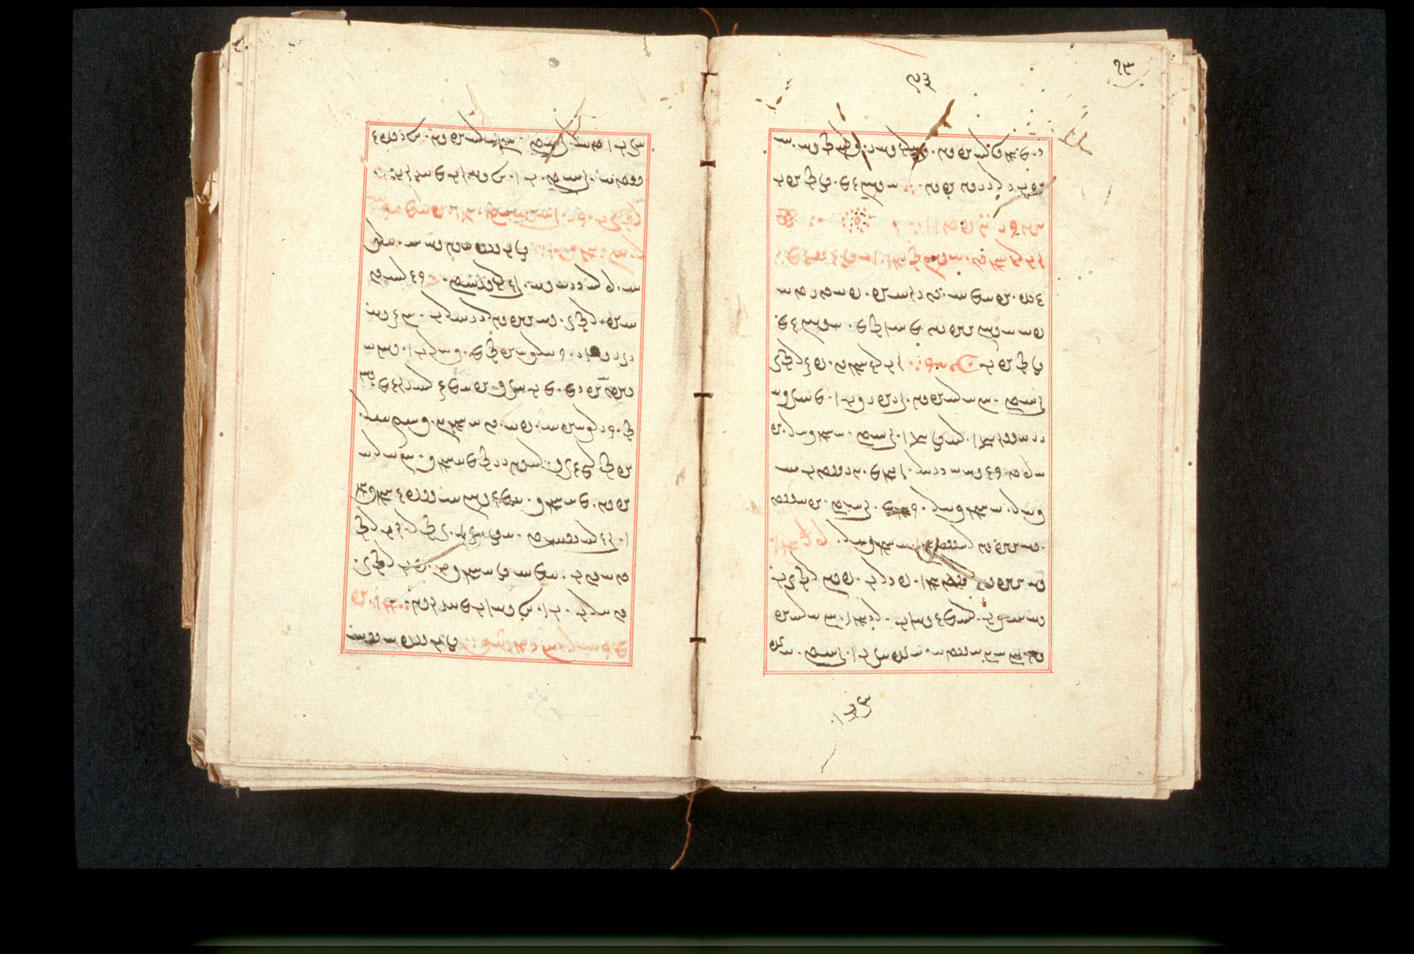 Folios 93v (right) and 94r (left)